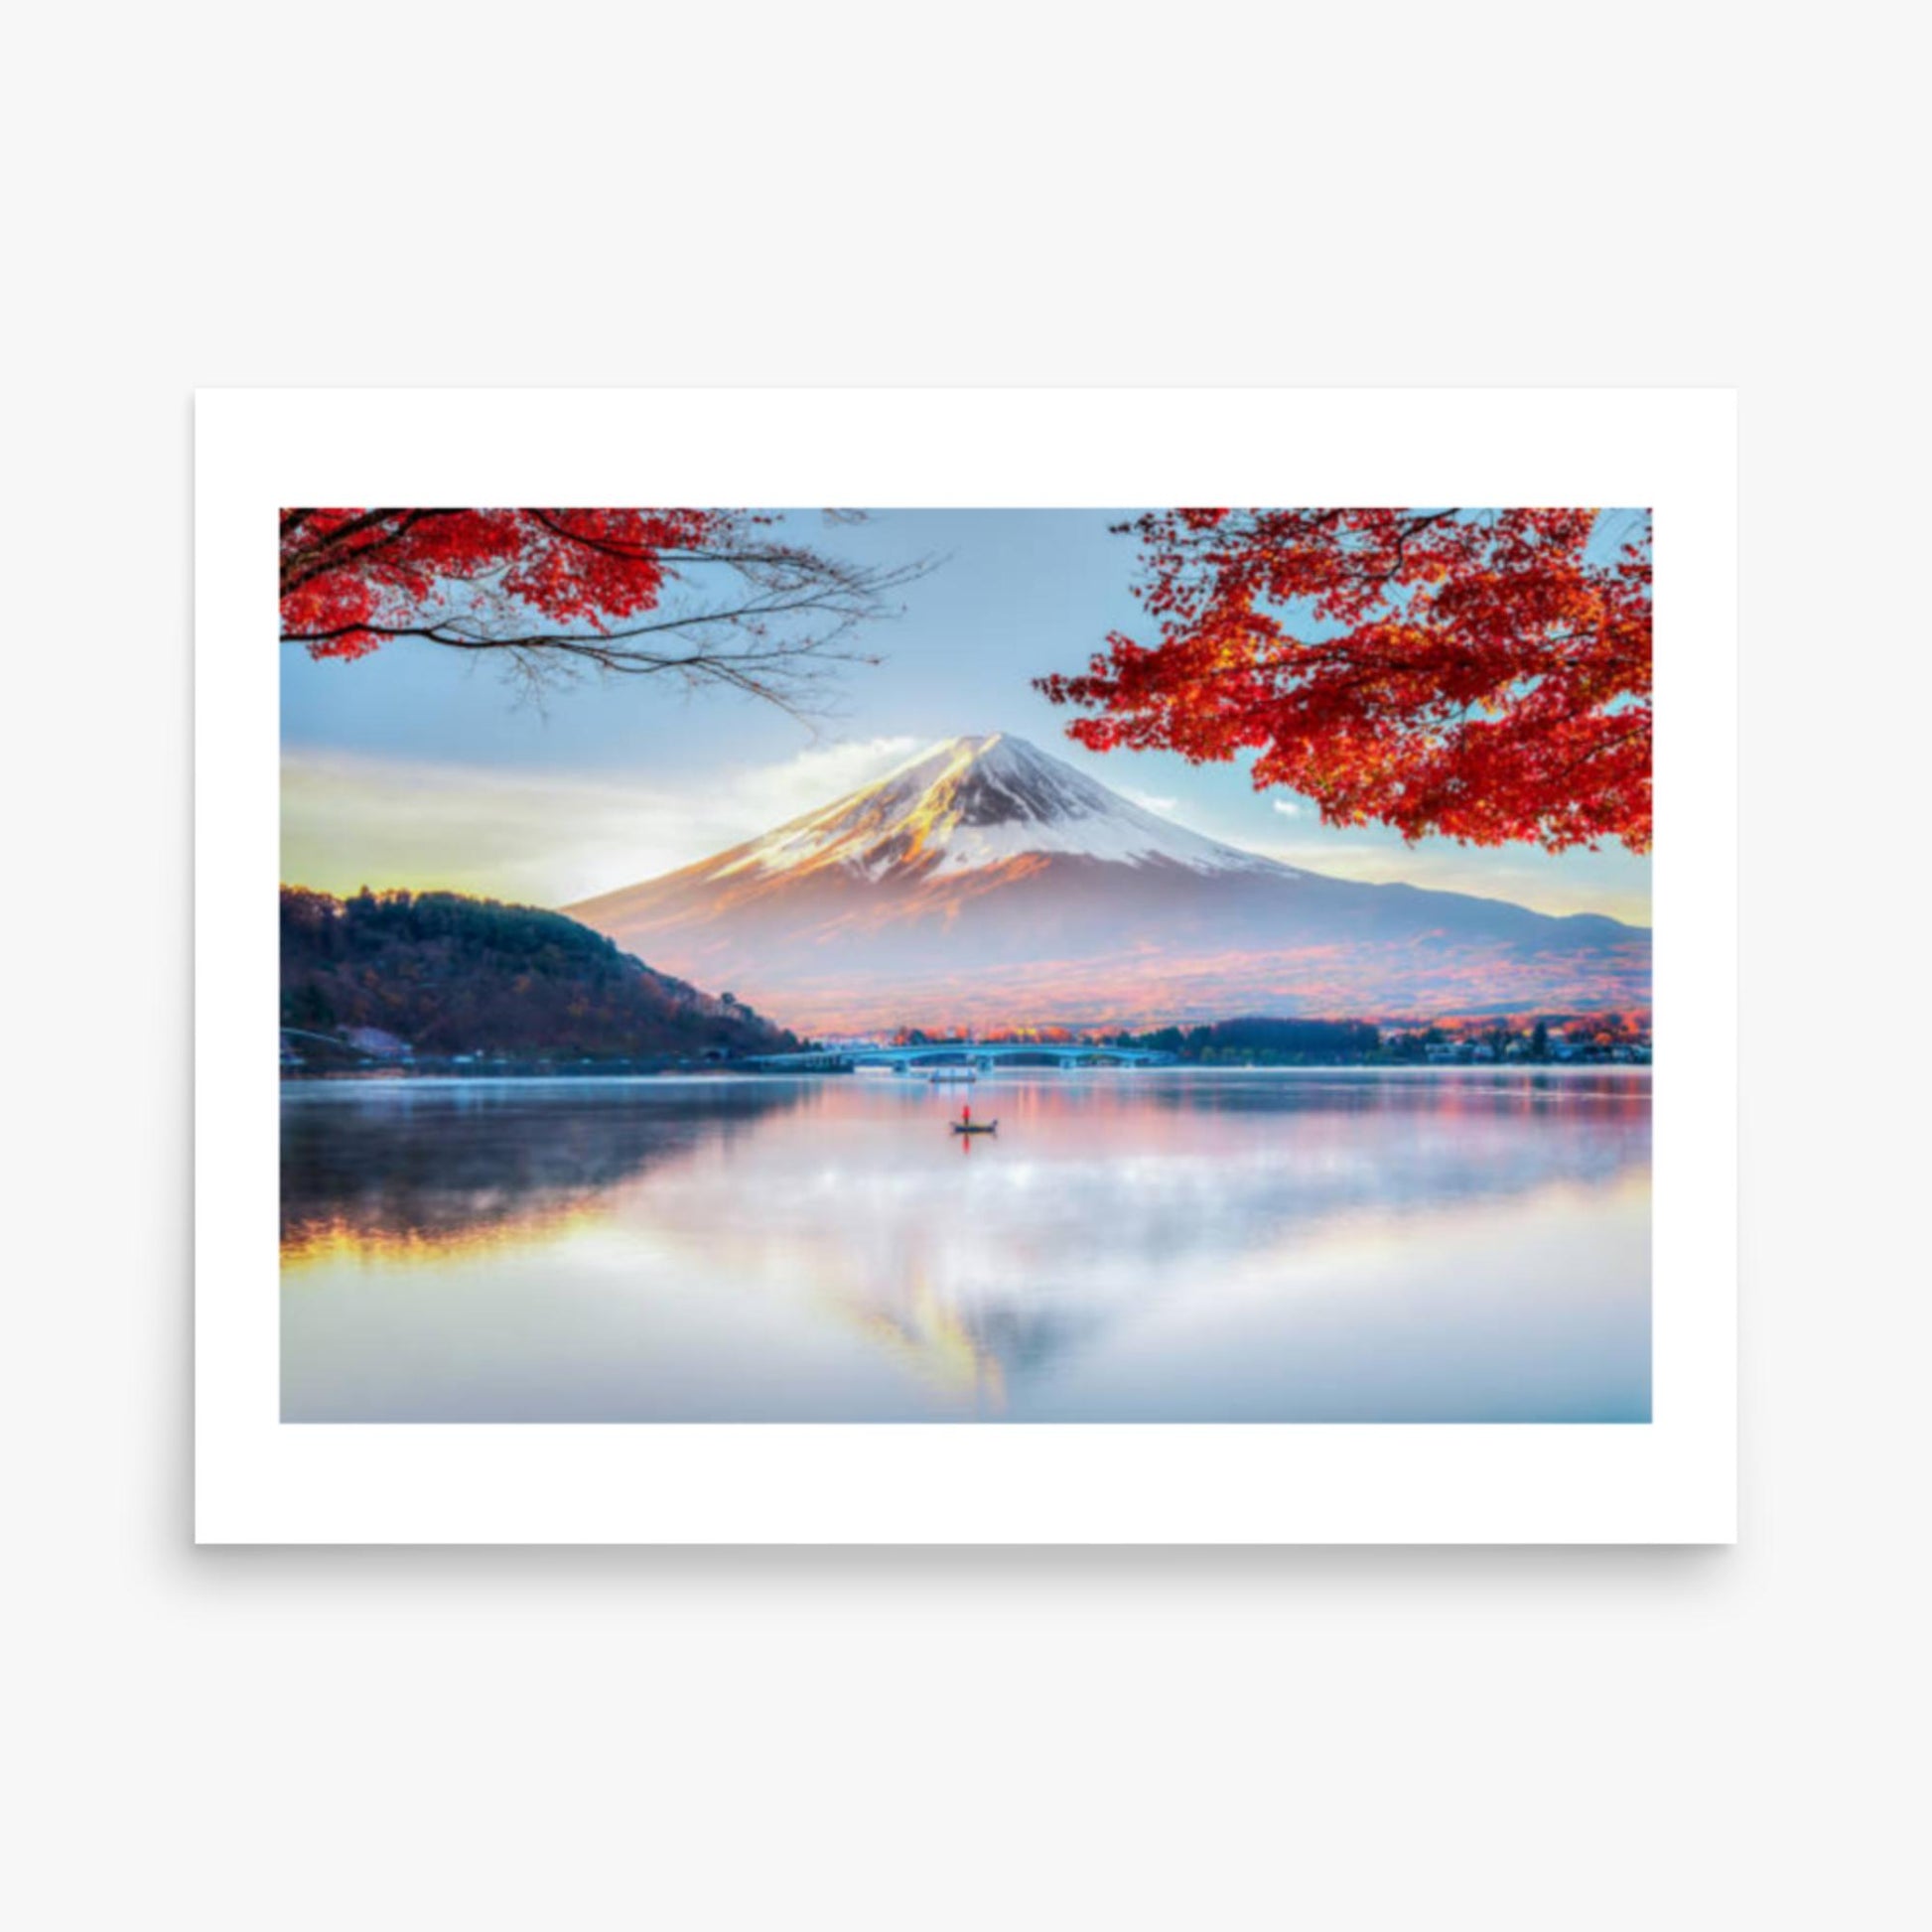 Fuji Mountain , Red Maple Tree and Fisherman Boat with Morning Mist in Autumn, Kawaguchiko Lake, Japan 18x24 in Poster